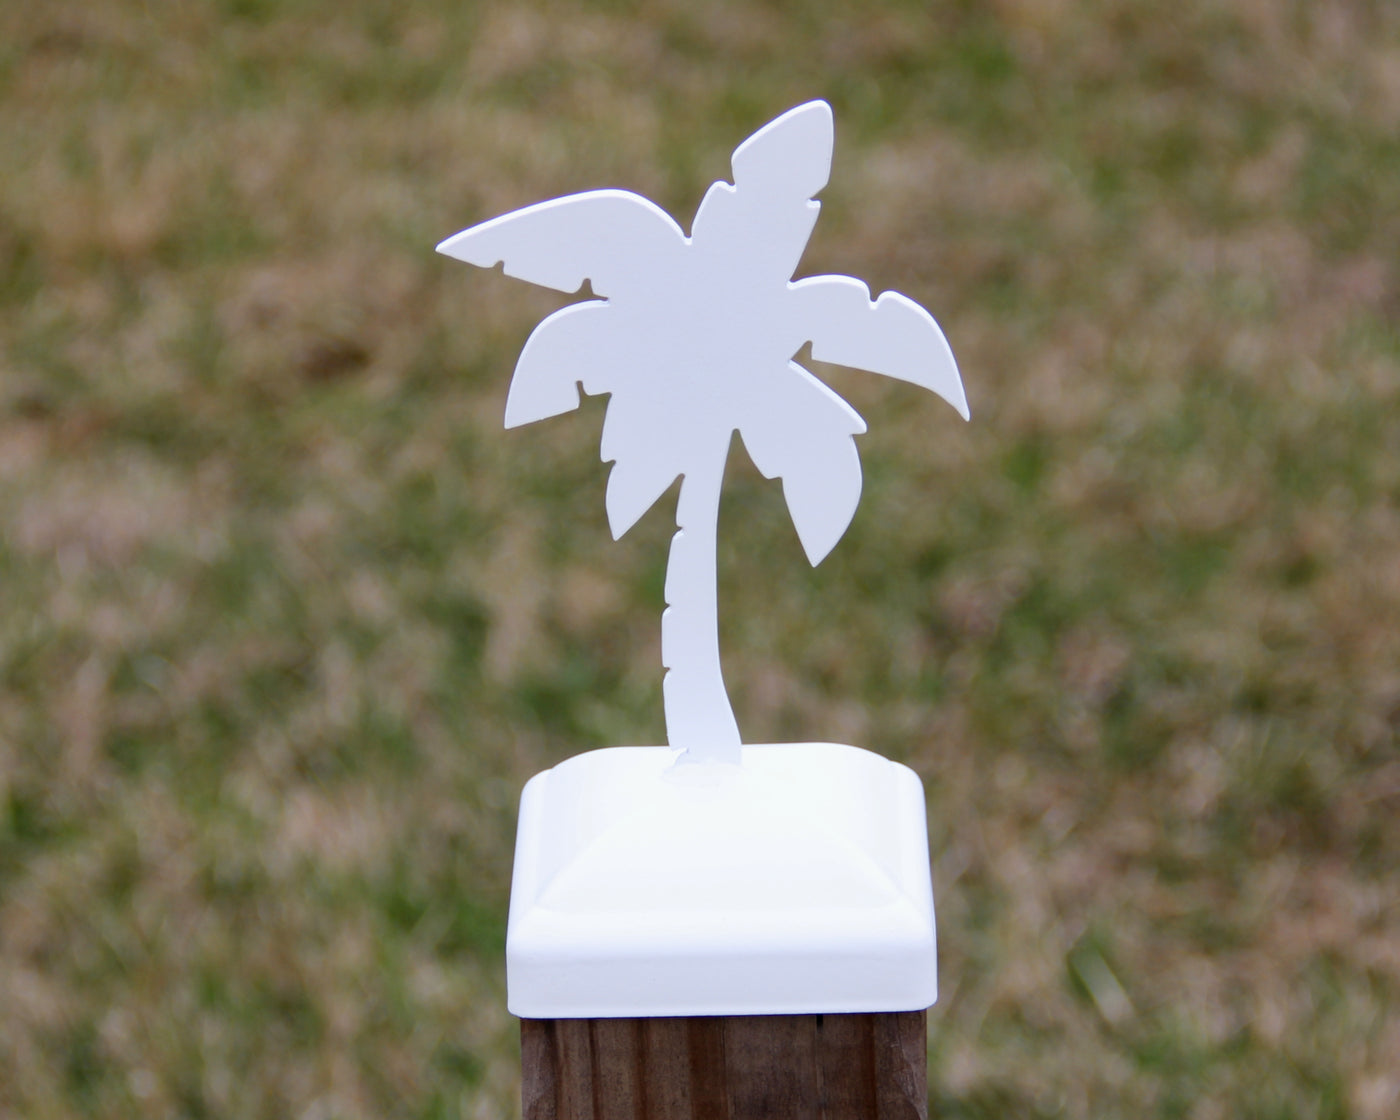 4X4 Palm Tree Post Cap - Madison Iron and Wood - Post Cap - metal outdoor decor - Steel deocrations - american made products - veteran owned business products - fencing decorations - fencing supplies - custom wall decorations - personalized wall signs - steel - decorative post caps - steel post caps - metal post caps - brackets - structural brackets - home improvement - easter - easter decorations - easter gift - easter yard decor